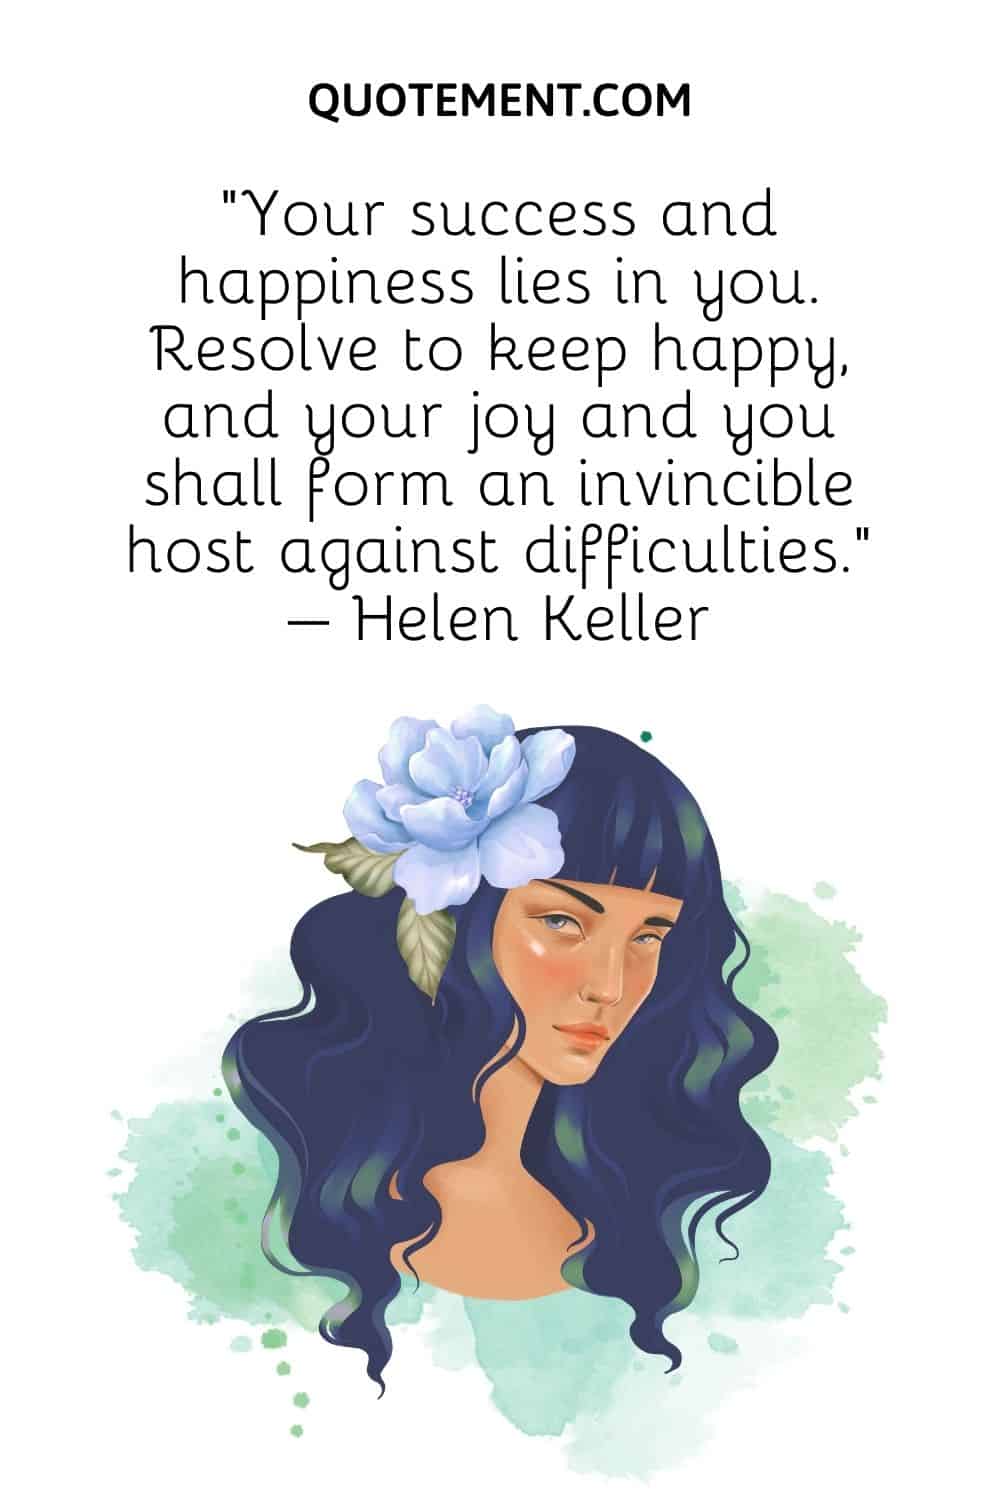 Your success and happiness lies in you. Resolve to keep happy, and your joy and you shall form an invincible host against difficulties. – Helen Keller